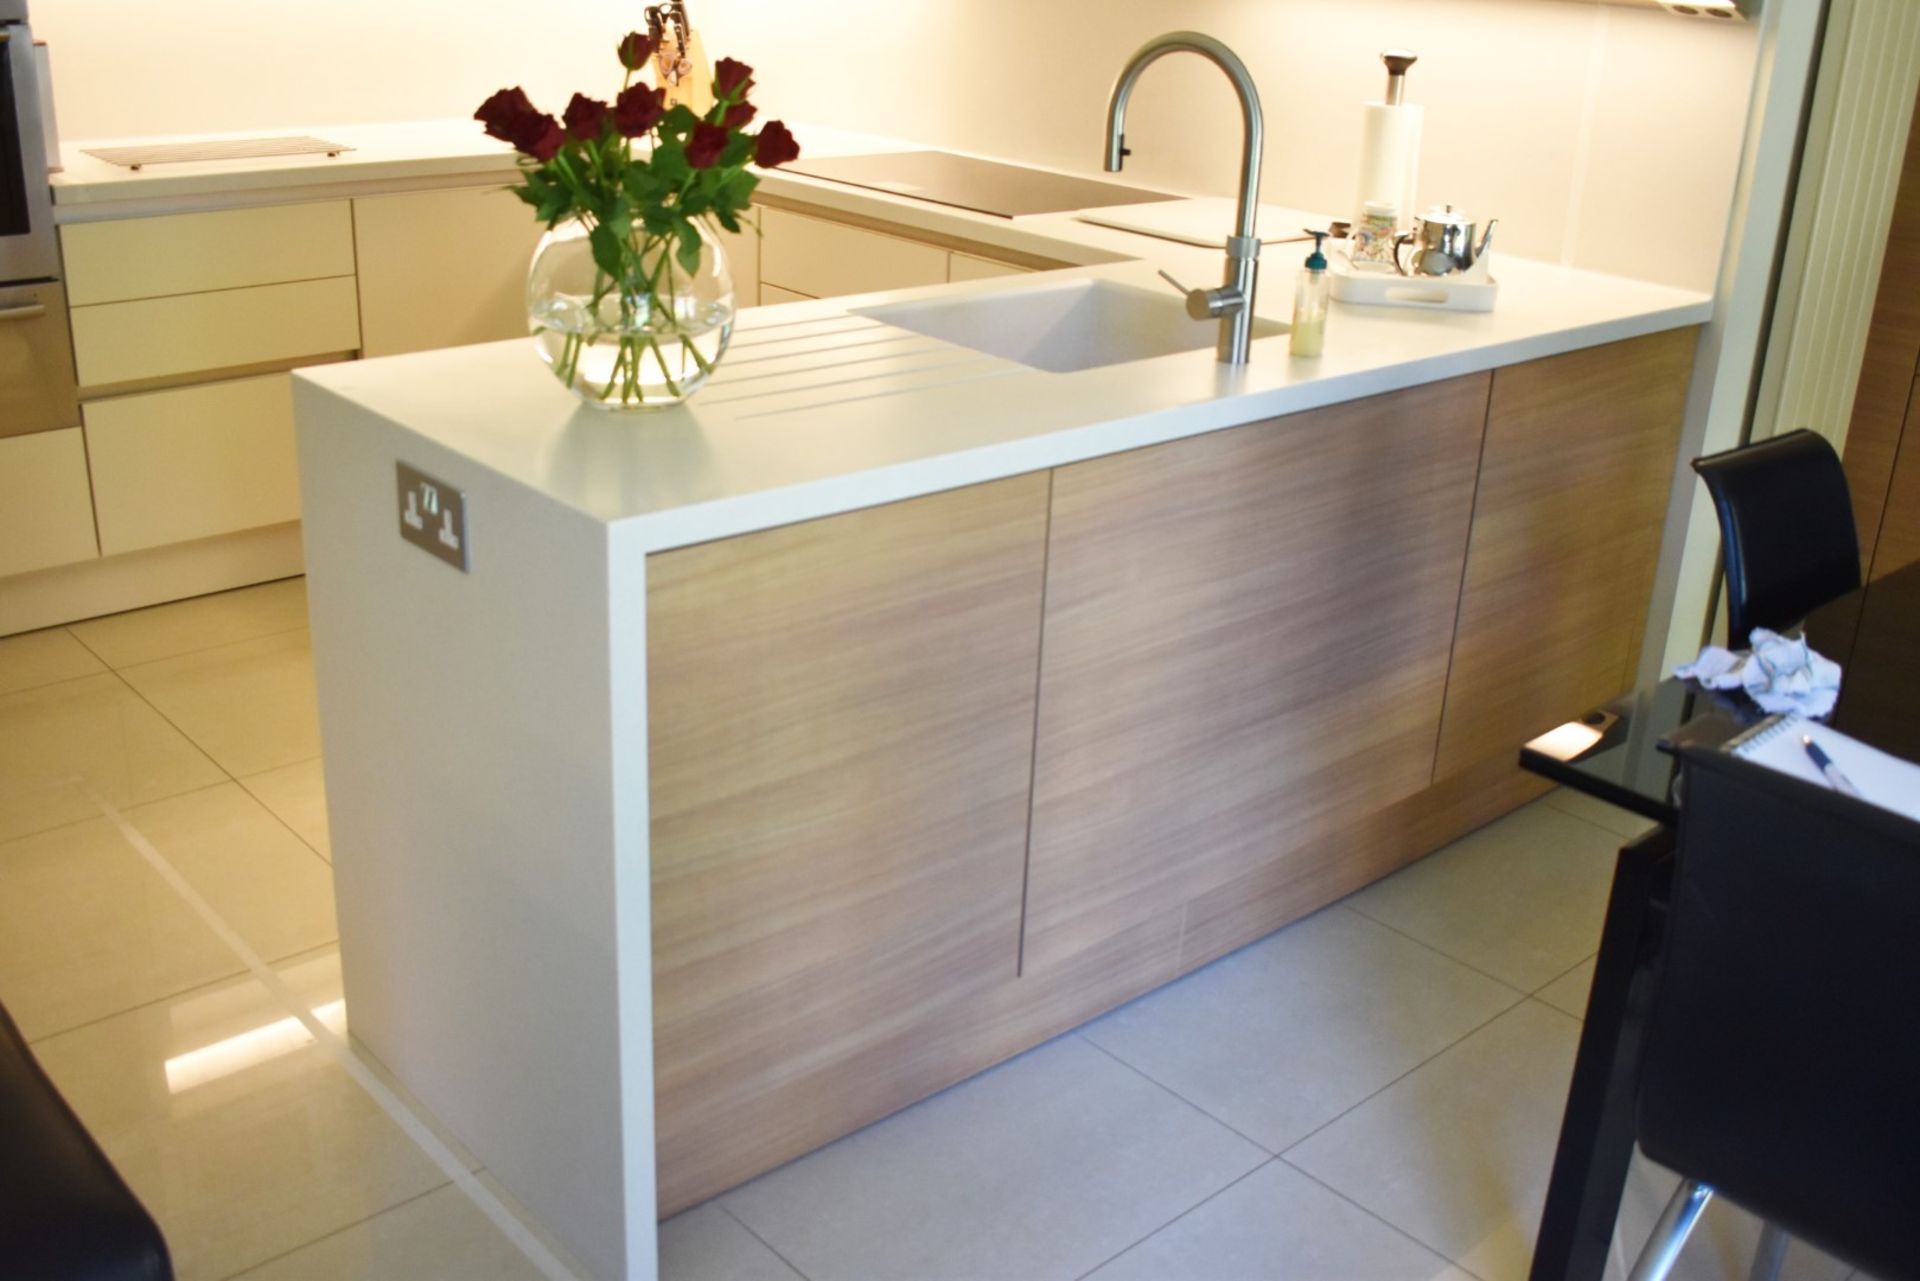 1 x Contemporary SieMatic Fitted Kitchen With Corian Work Surfaces and Integrated Appliances - Image 9 of 70